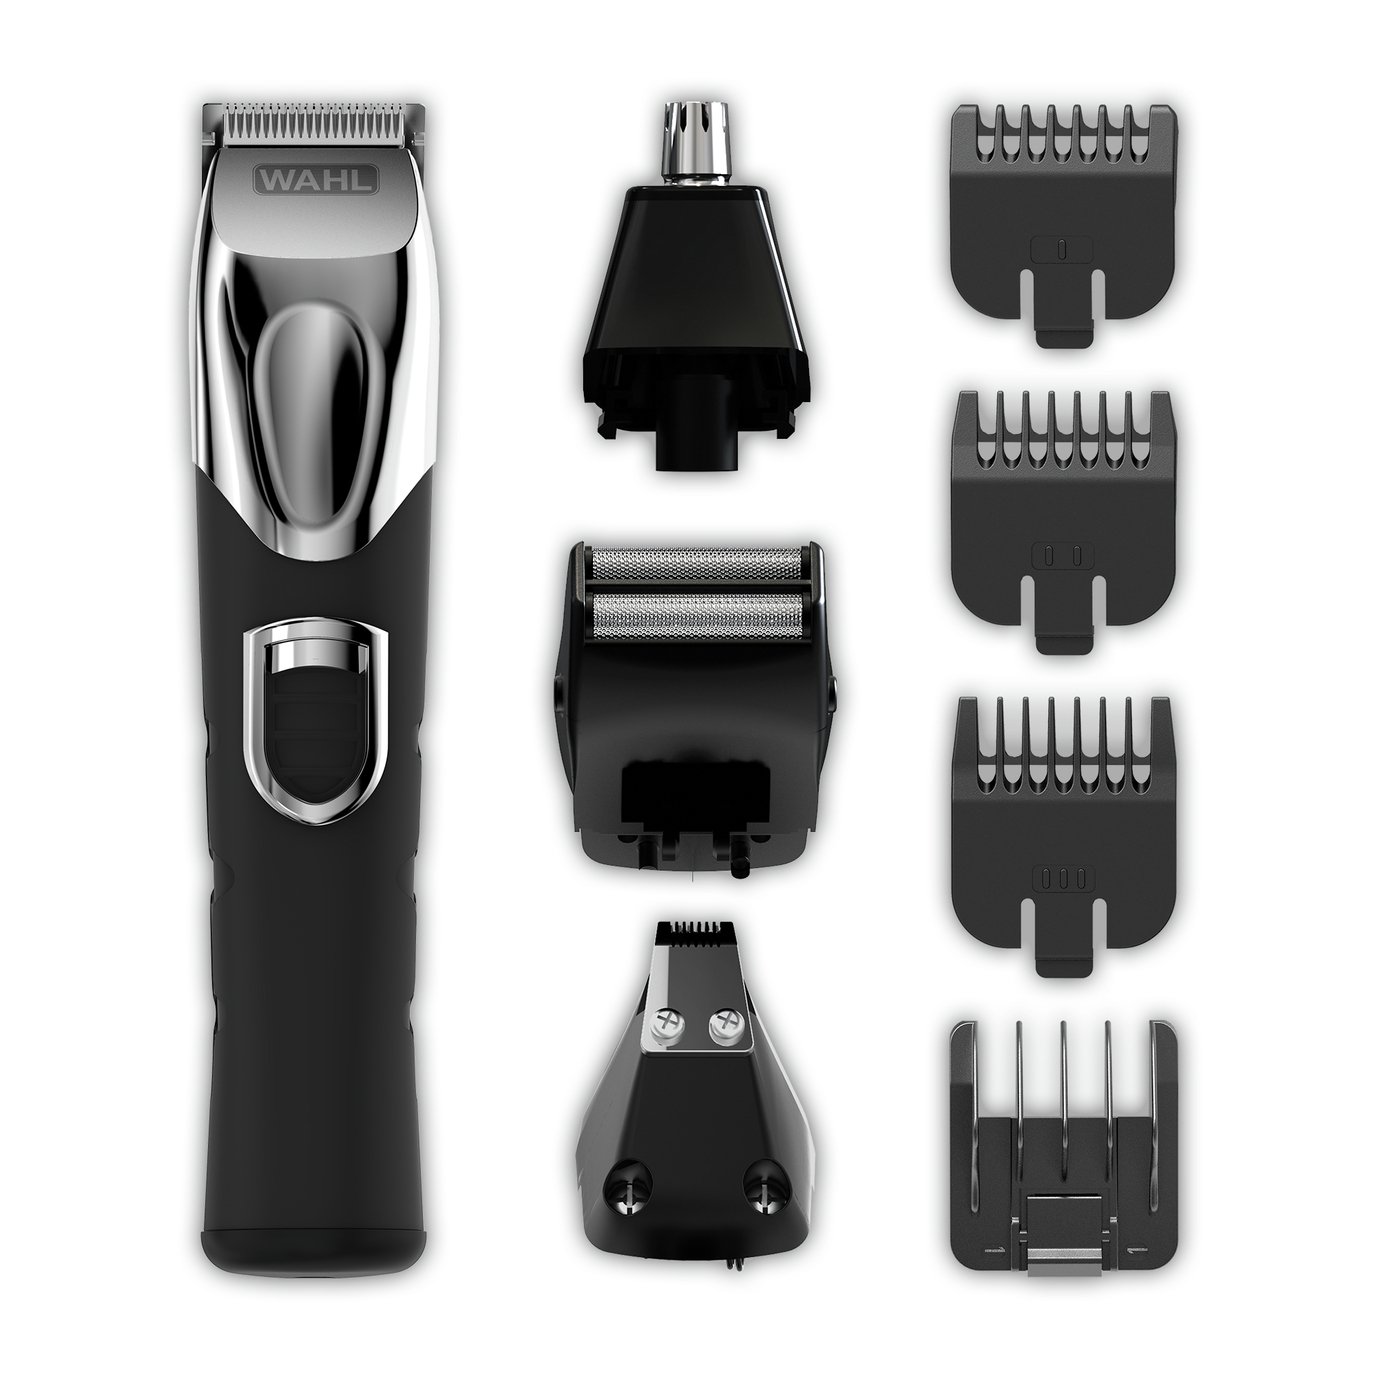 Wahl 4 in 1 Precision Multi-Groomer WM8050-800X review